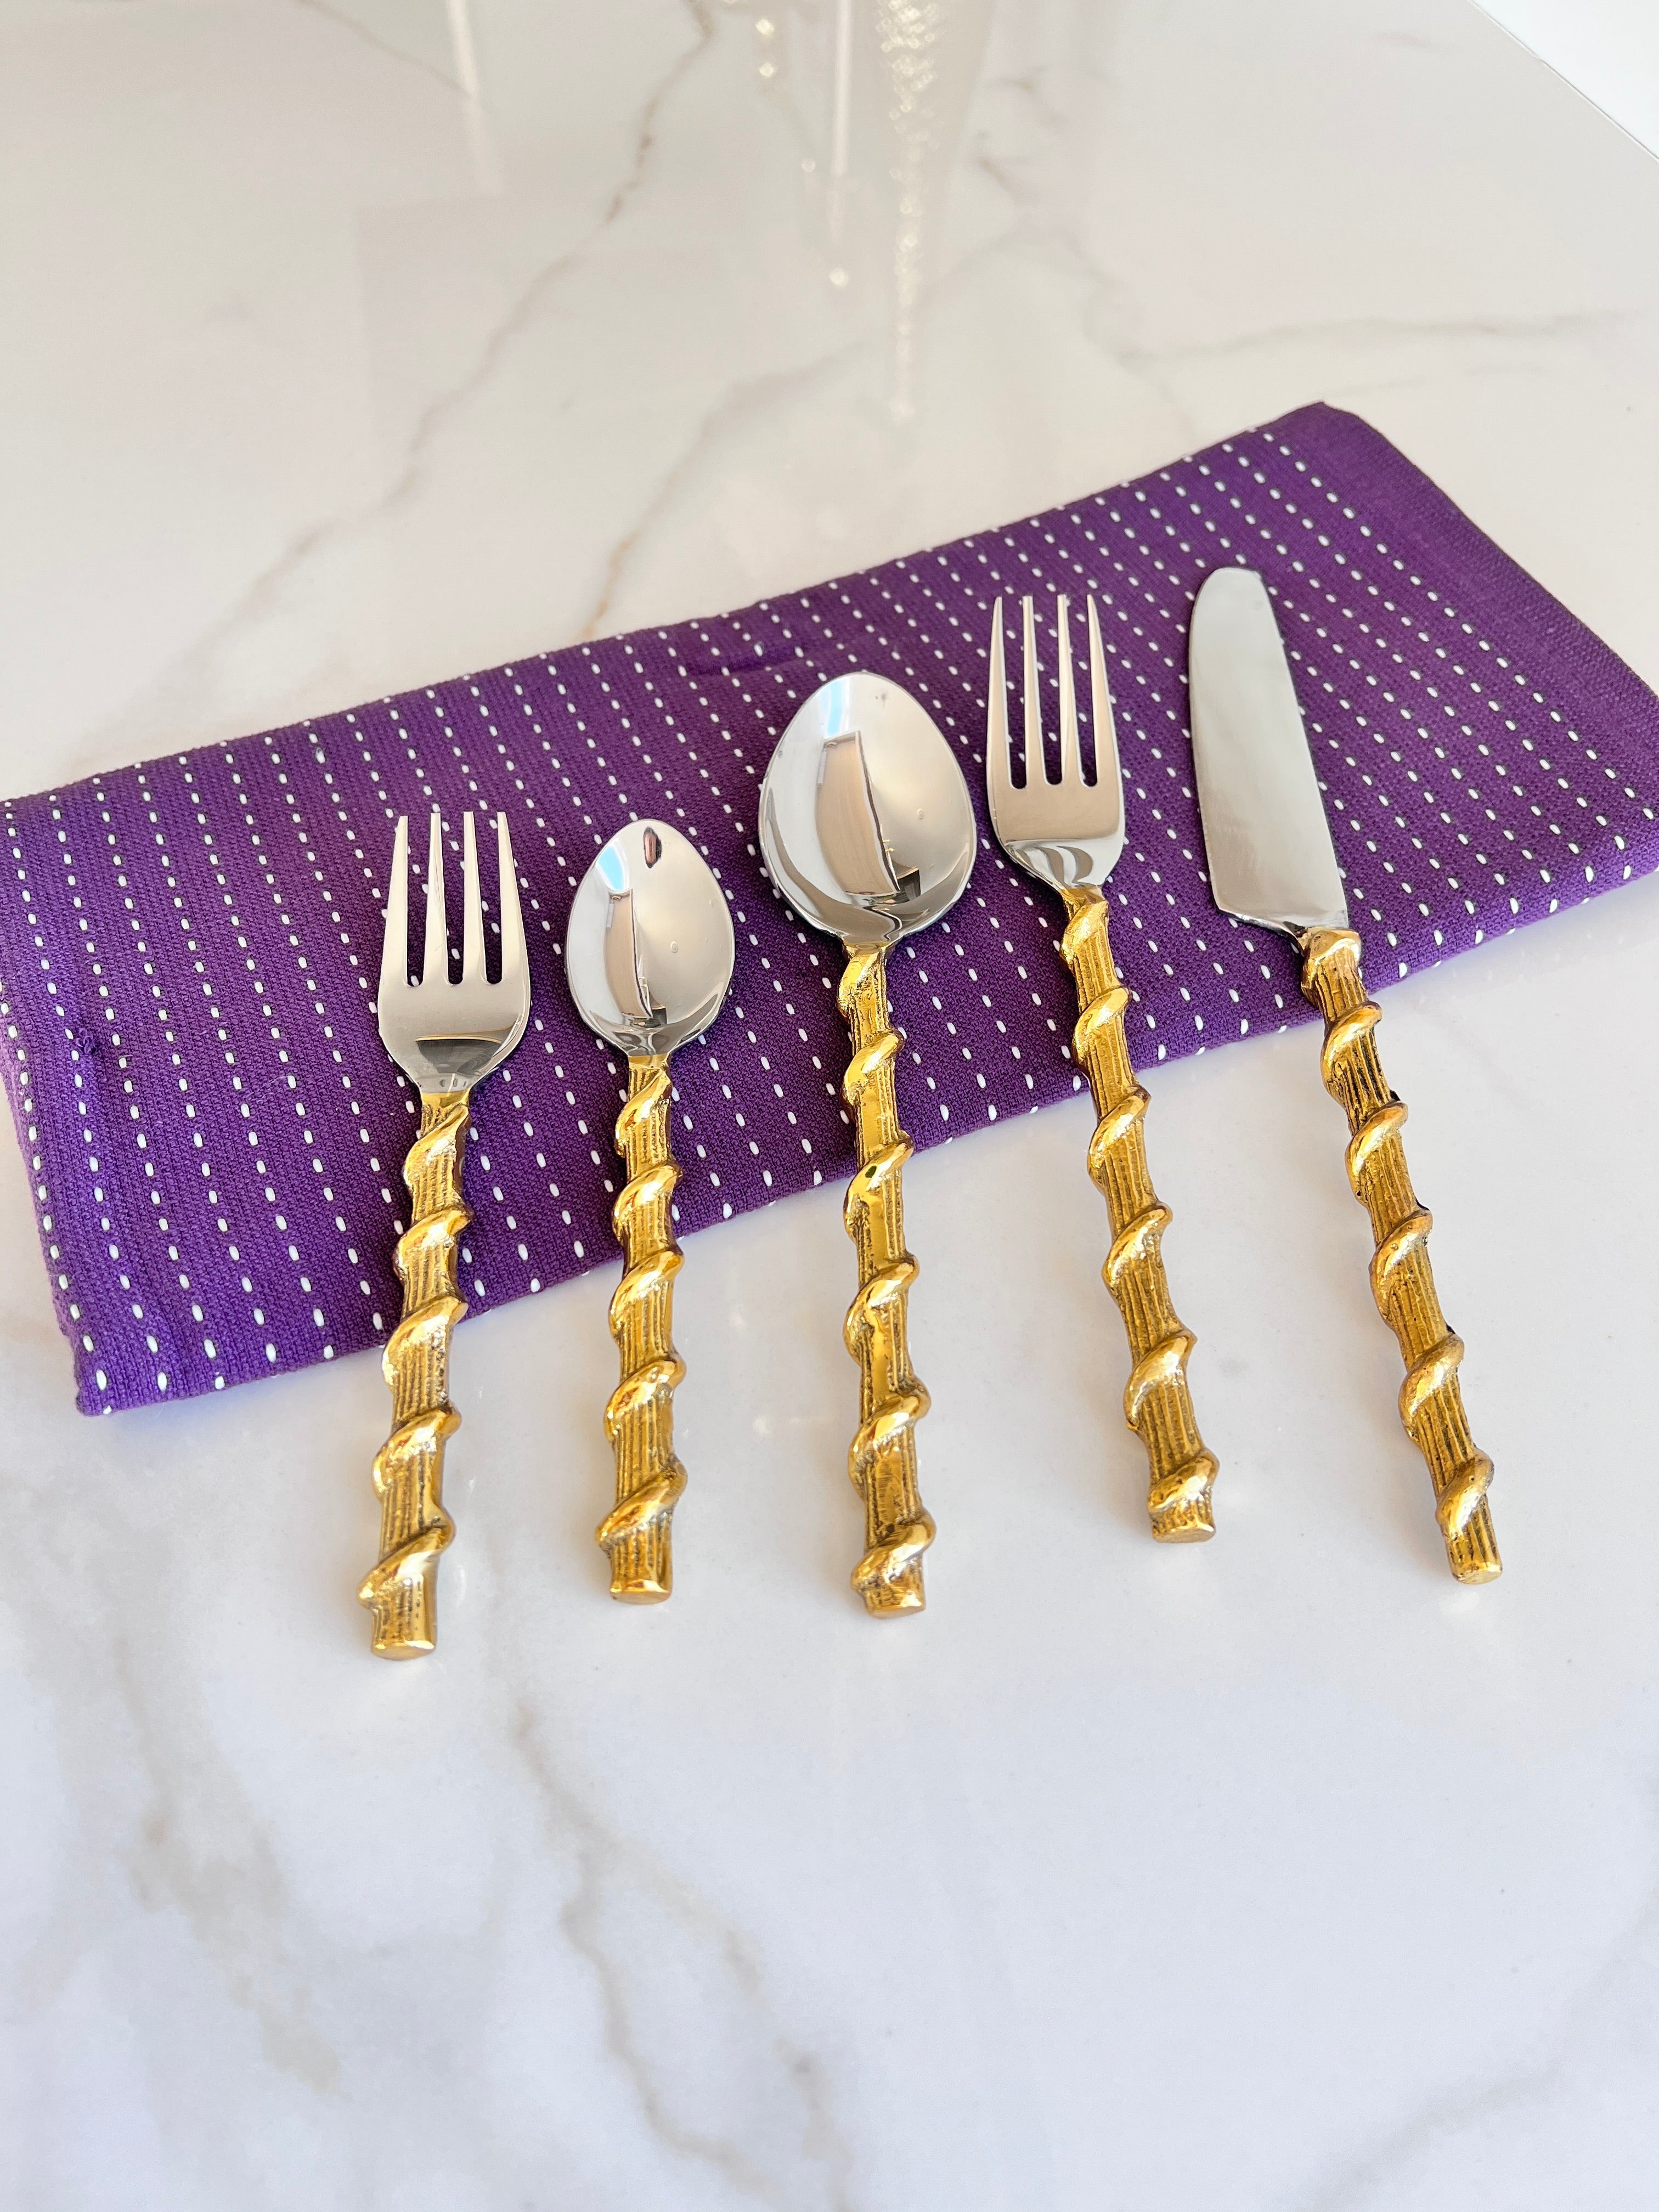 Gold Twisted Rope Flatware 5-Pcs - HTS HOME DECOR